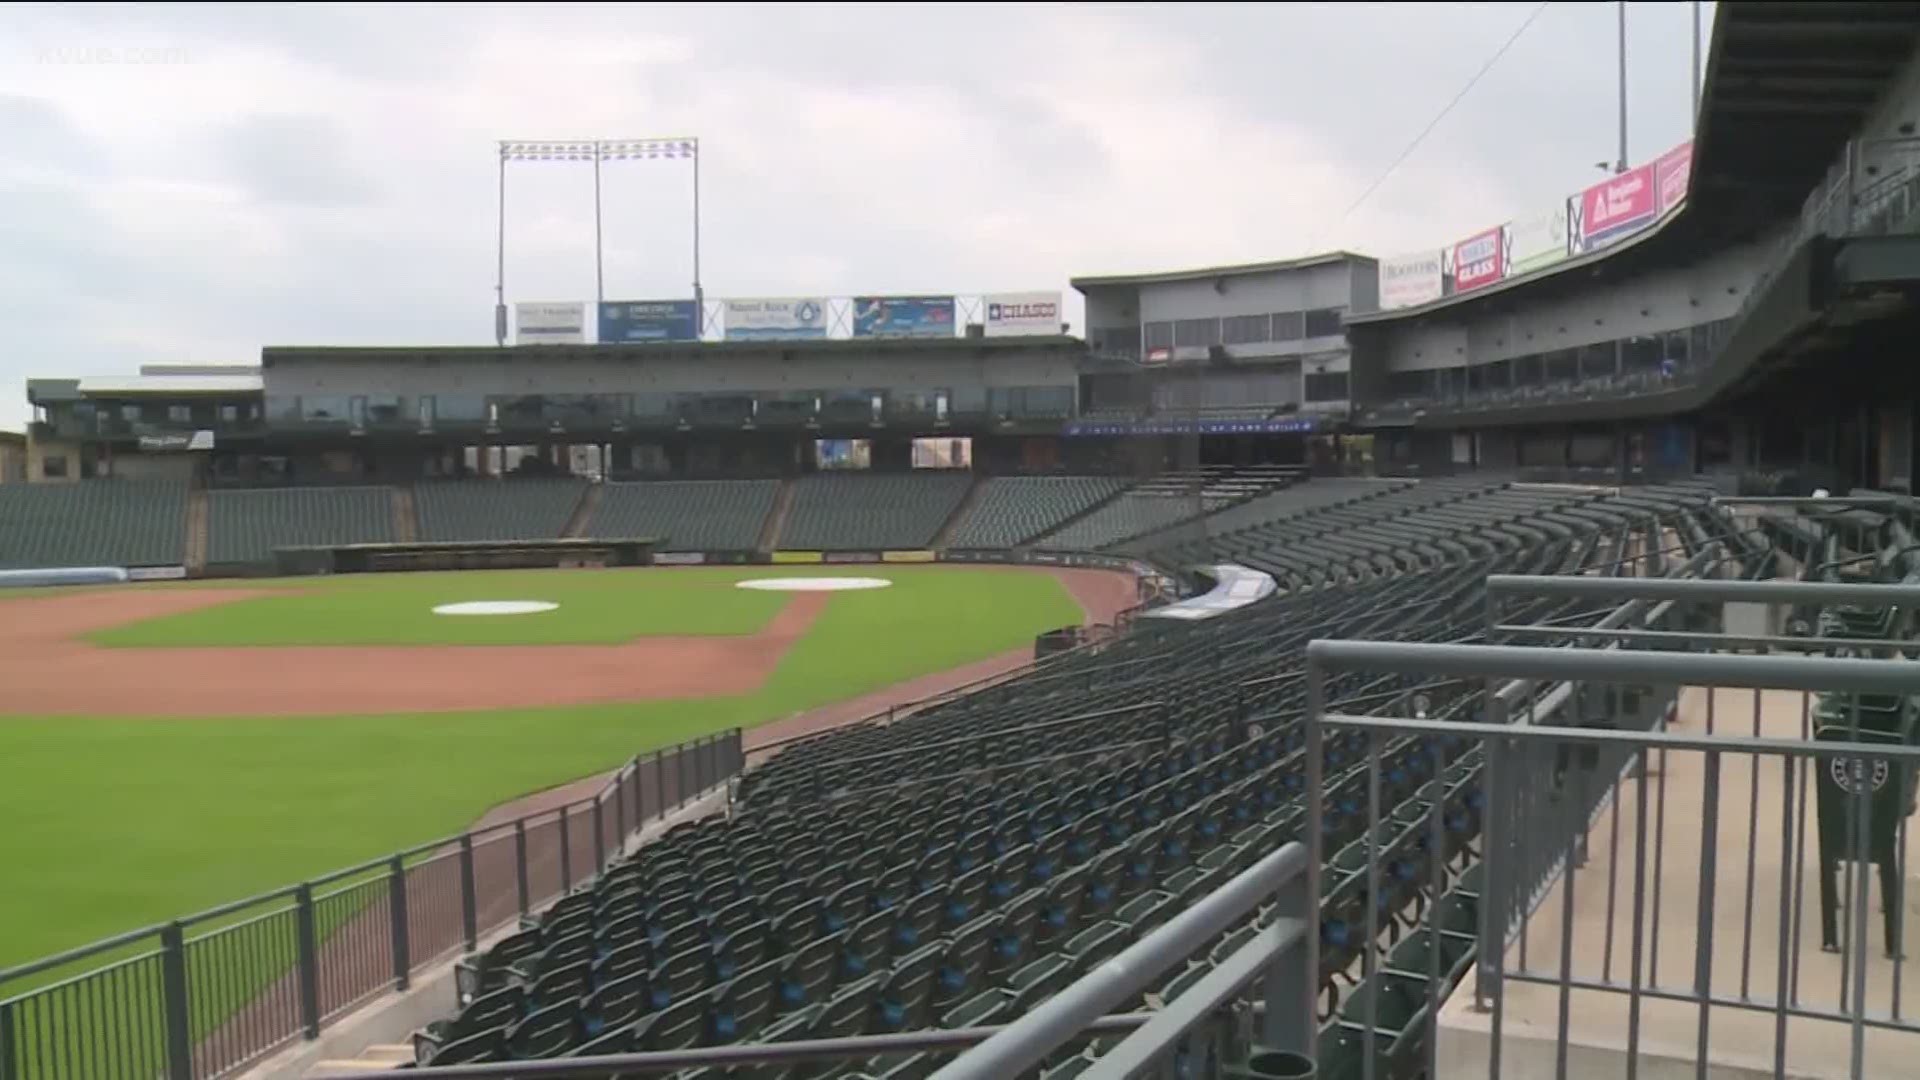 The team is taking full advantage of the lack of baseball and holding camps starting June 1 at Dell Diamond.